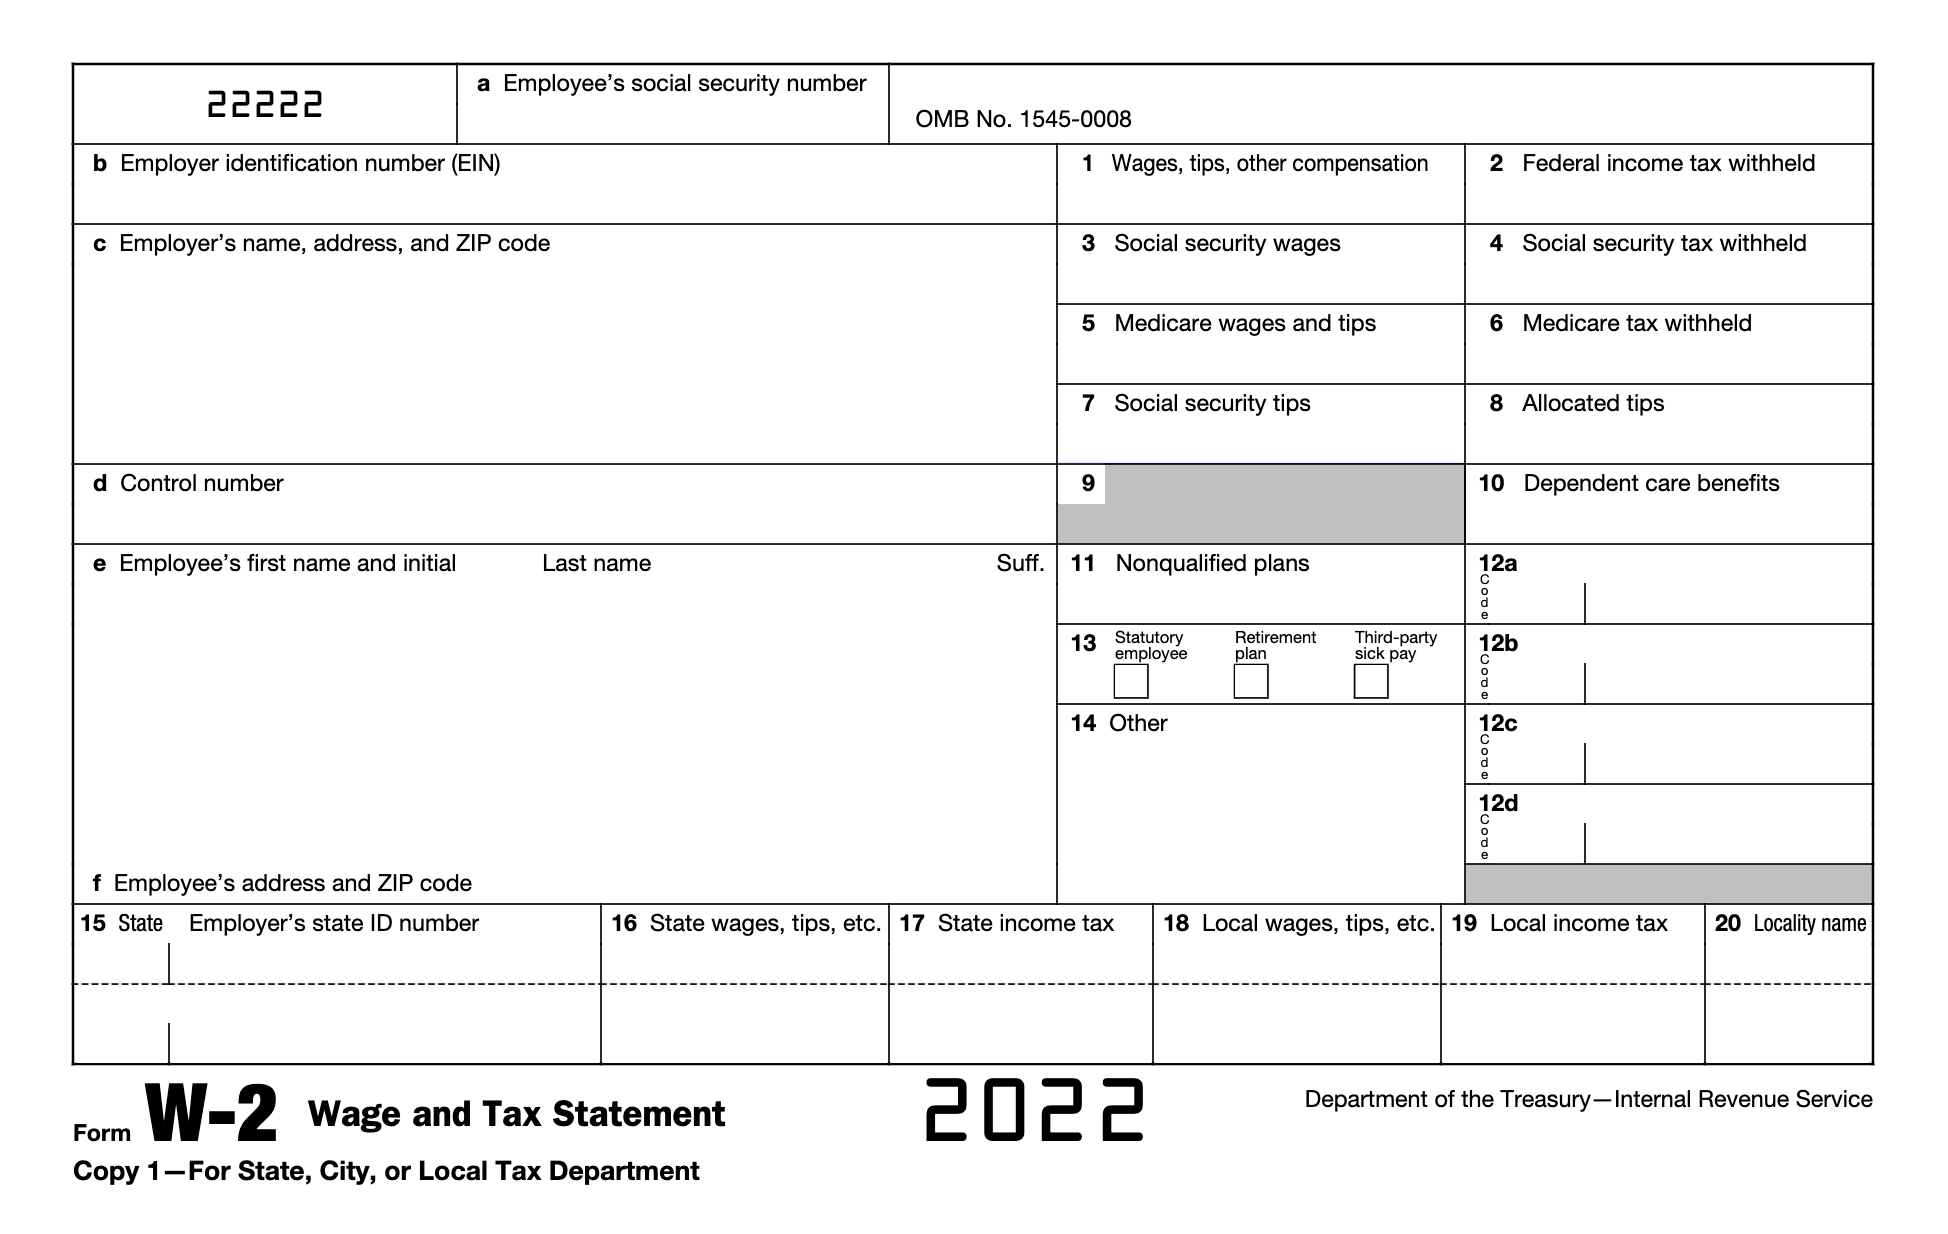 W-2 form example